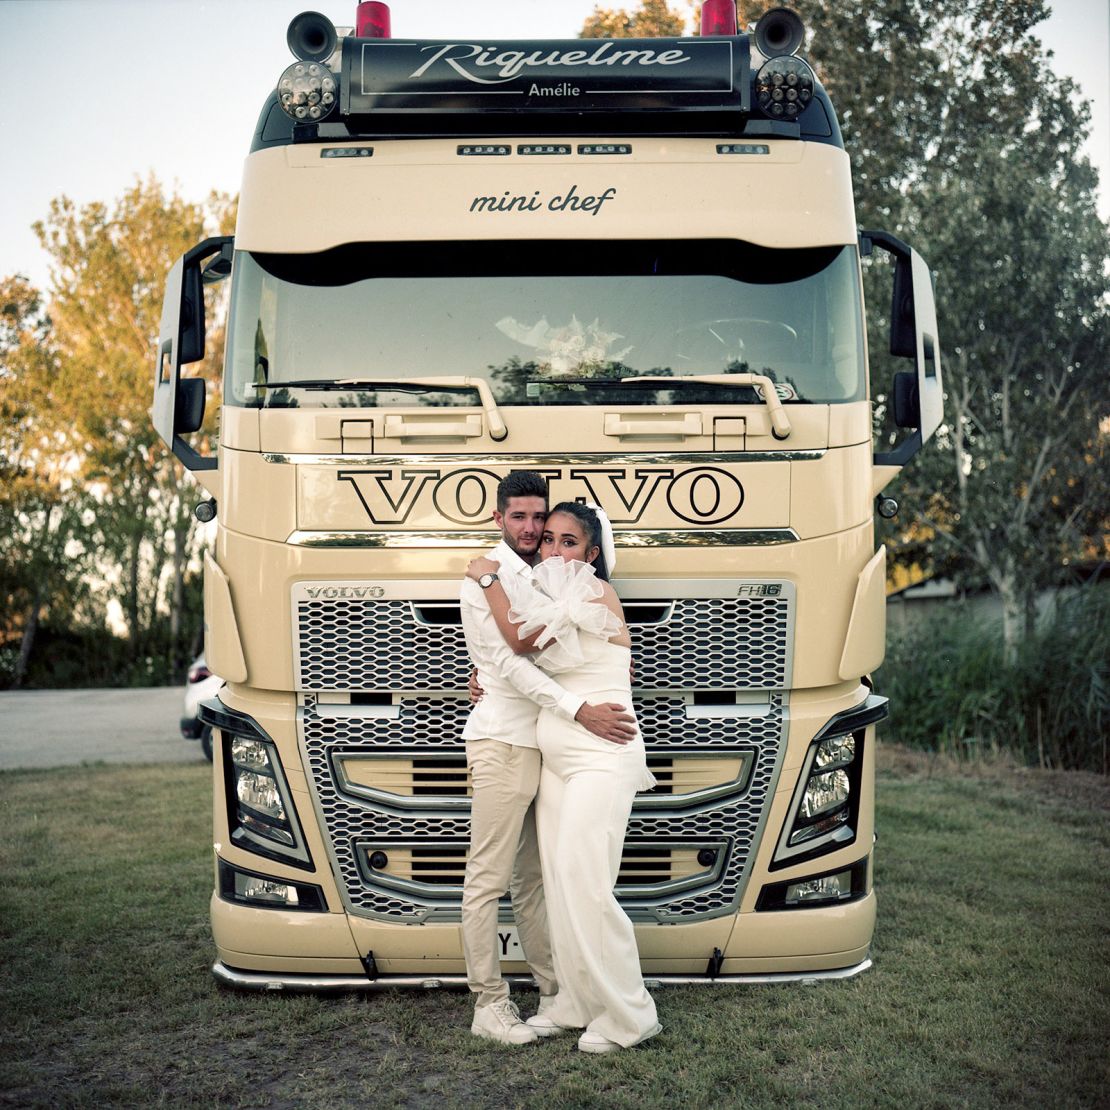 Amélie and Jéremy, photographed in August 2021. Amélie is one of the few female truck drivers in France.